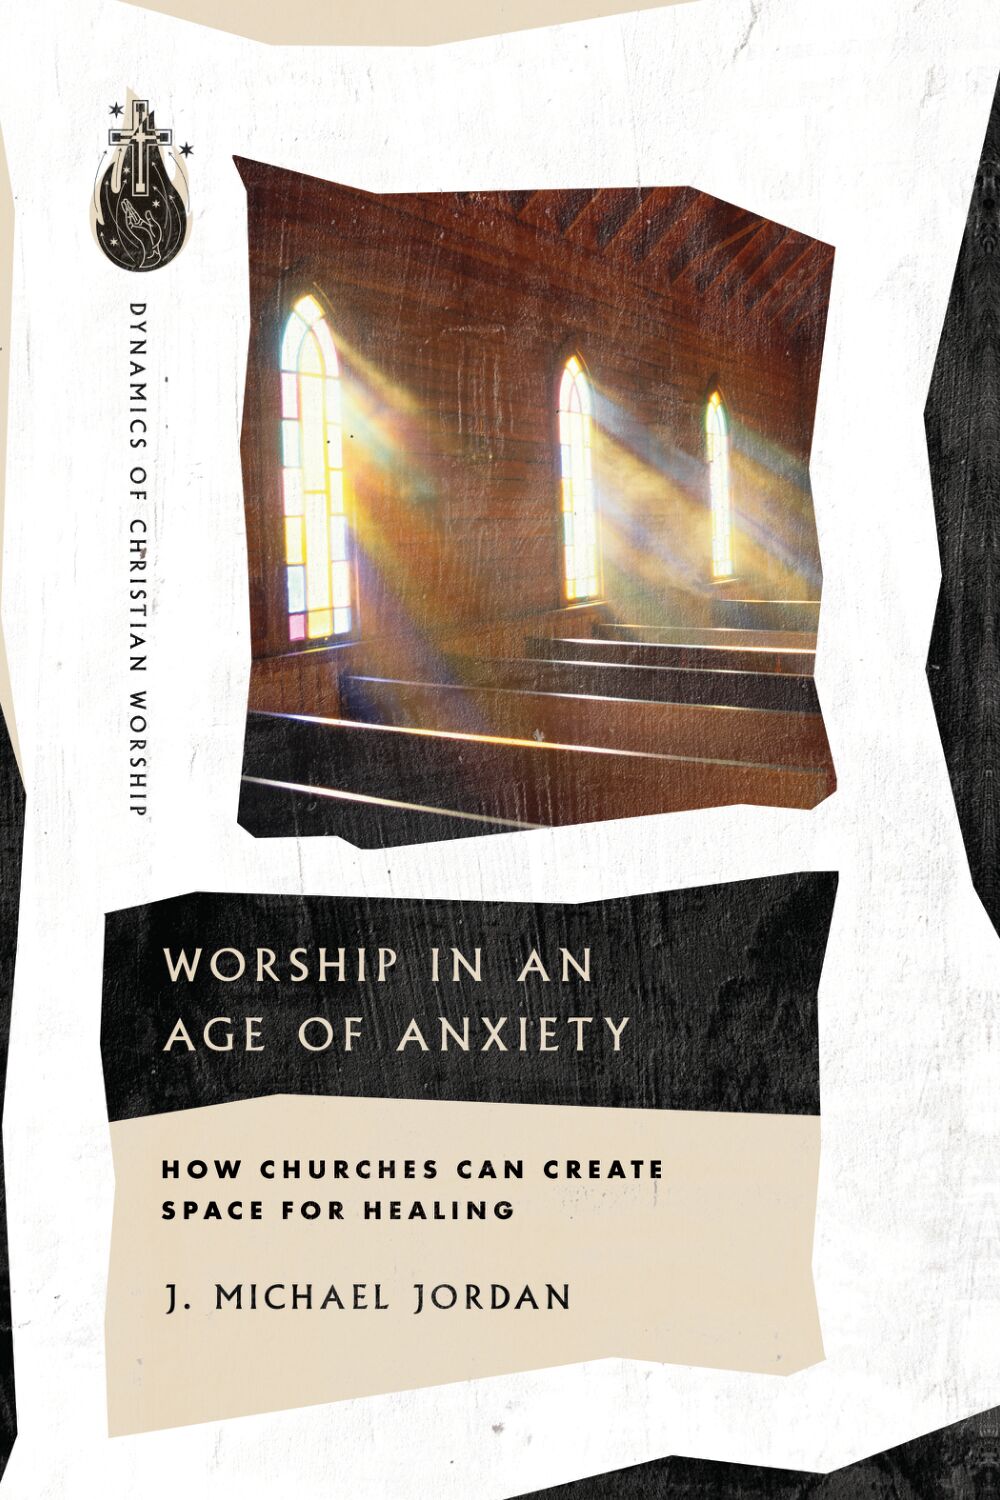 Worship in an Age of Anxiety by J. Michael Jordan